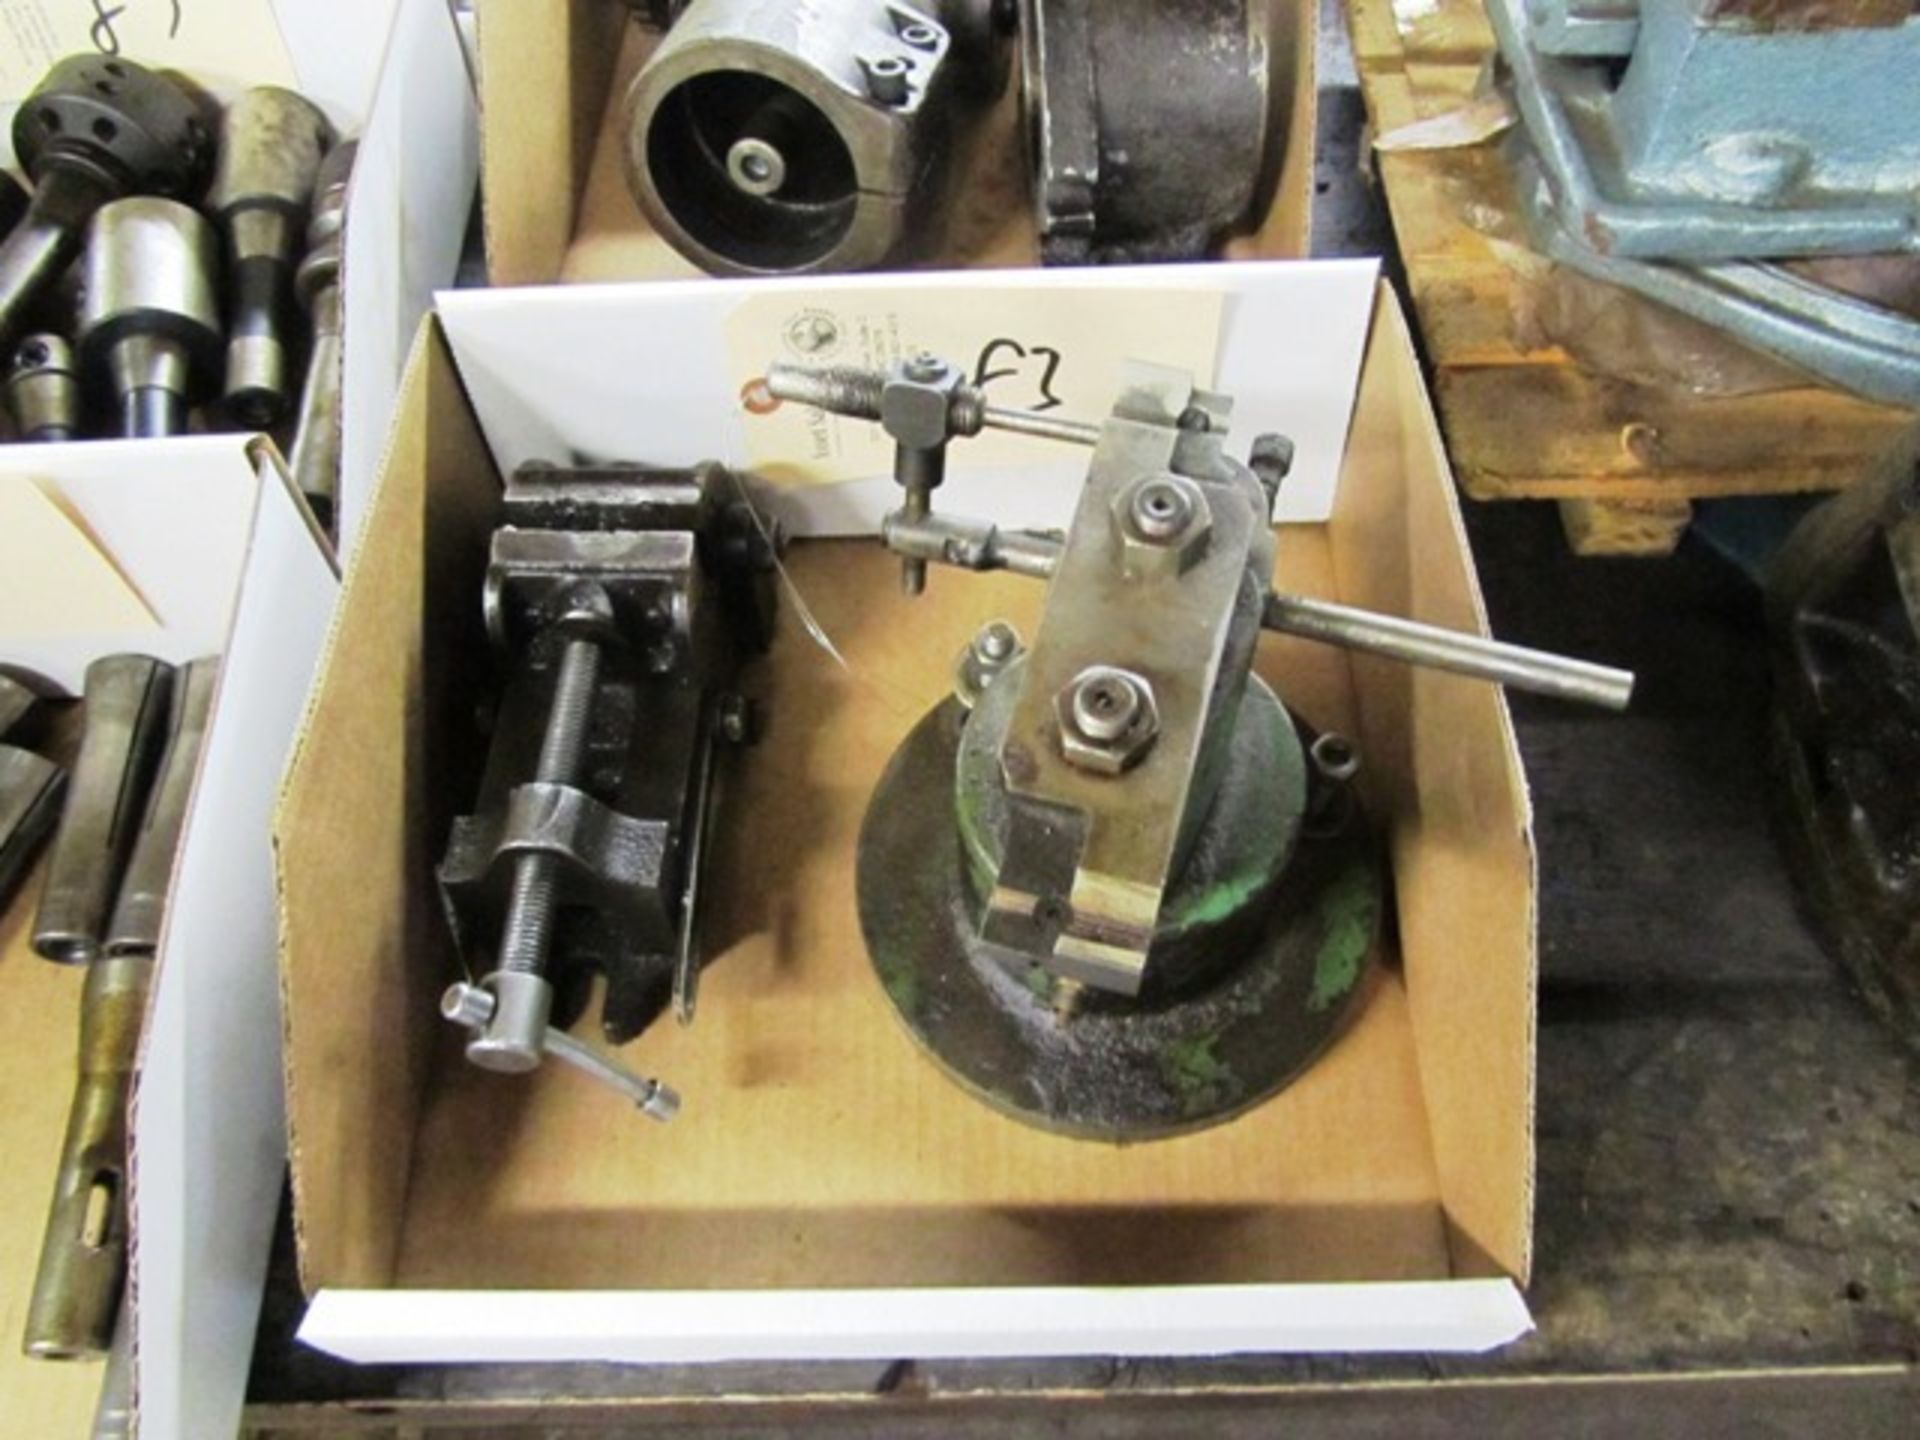 Vise & Drill Fixture